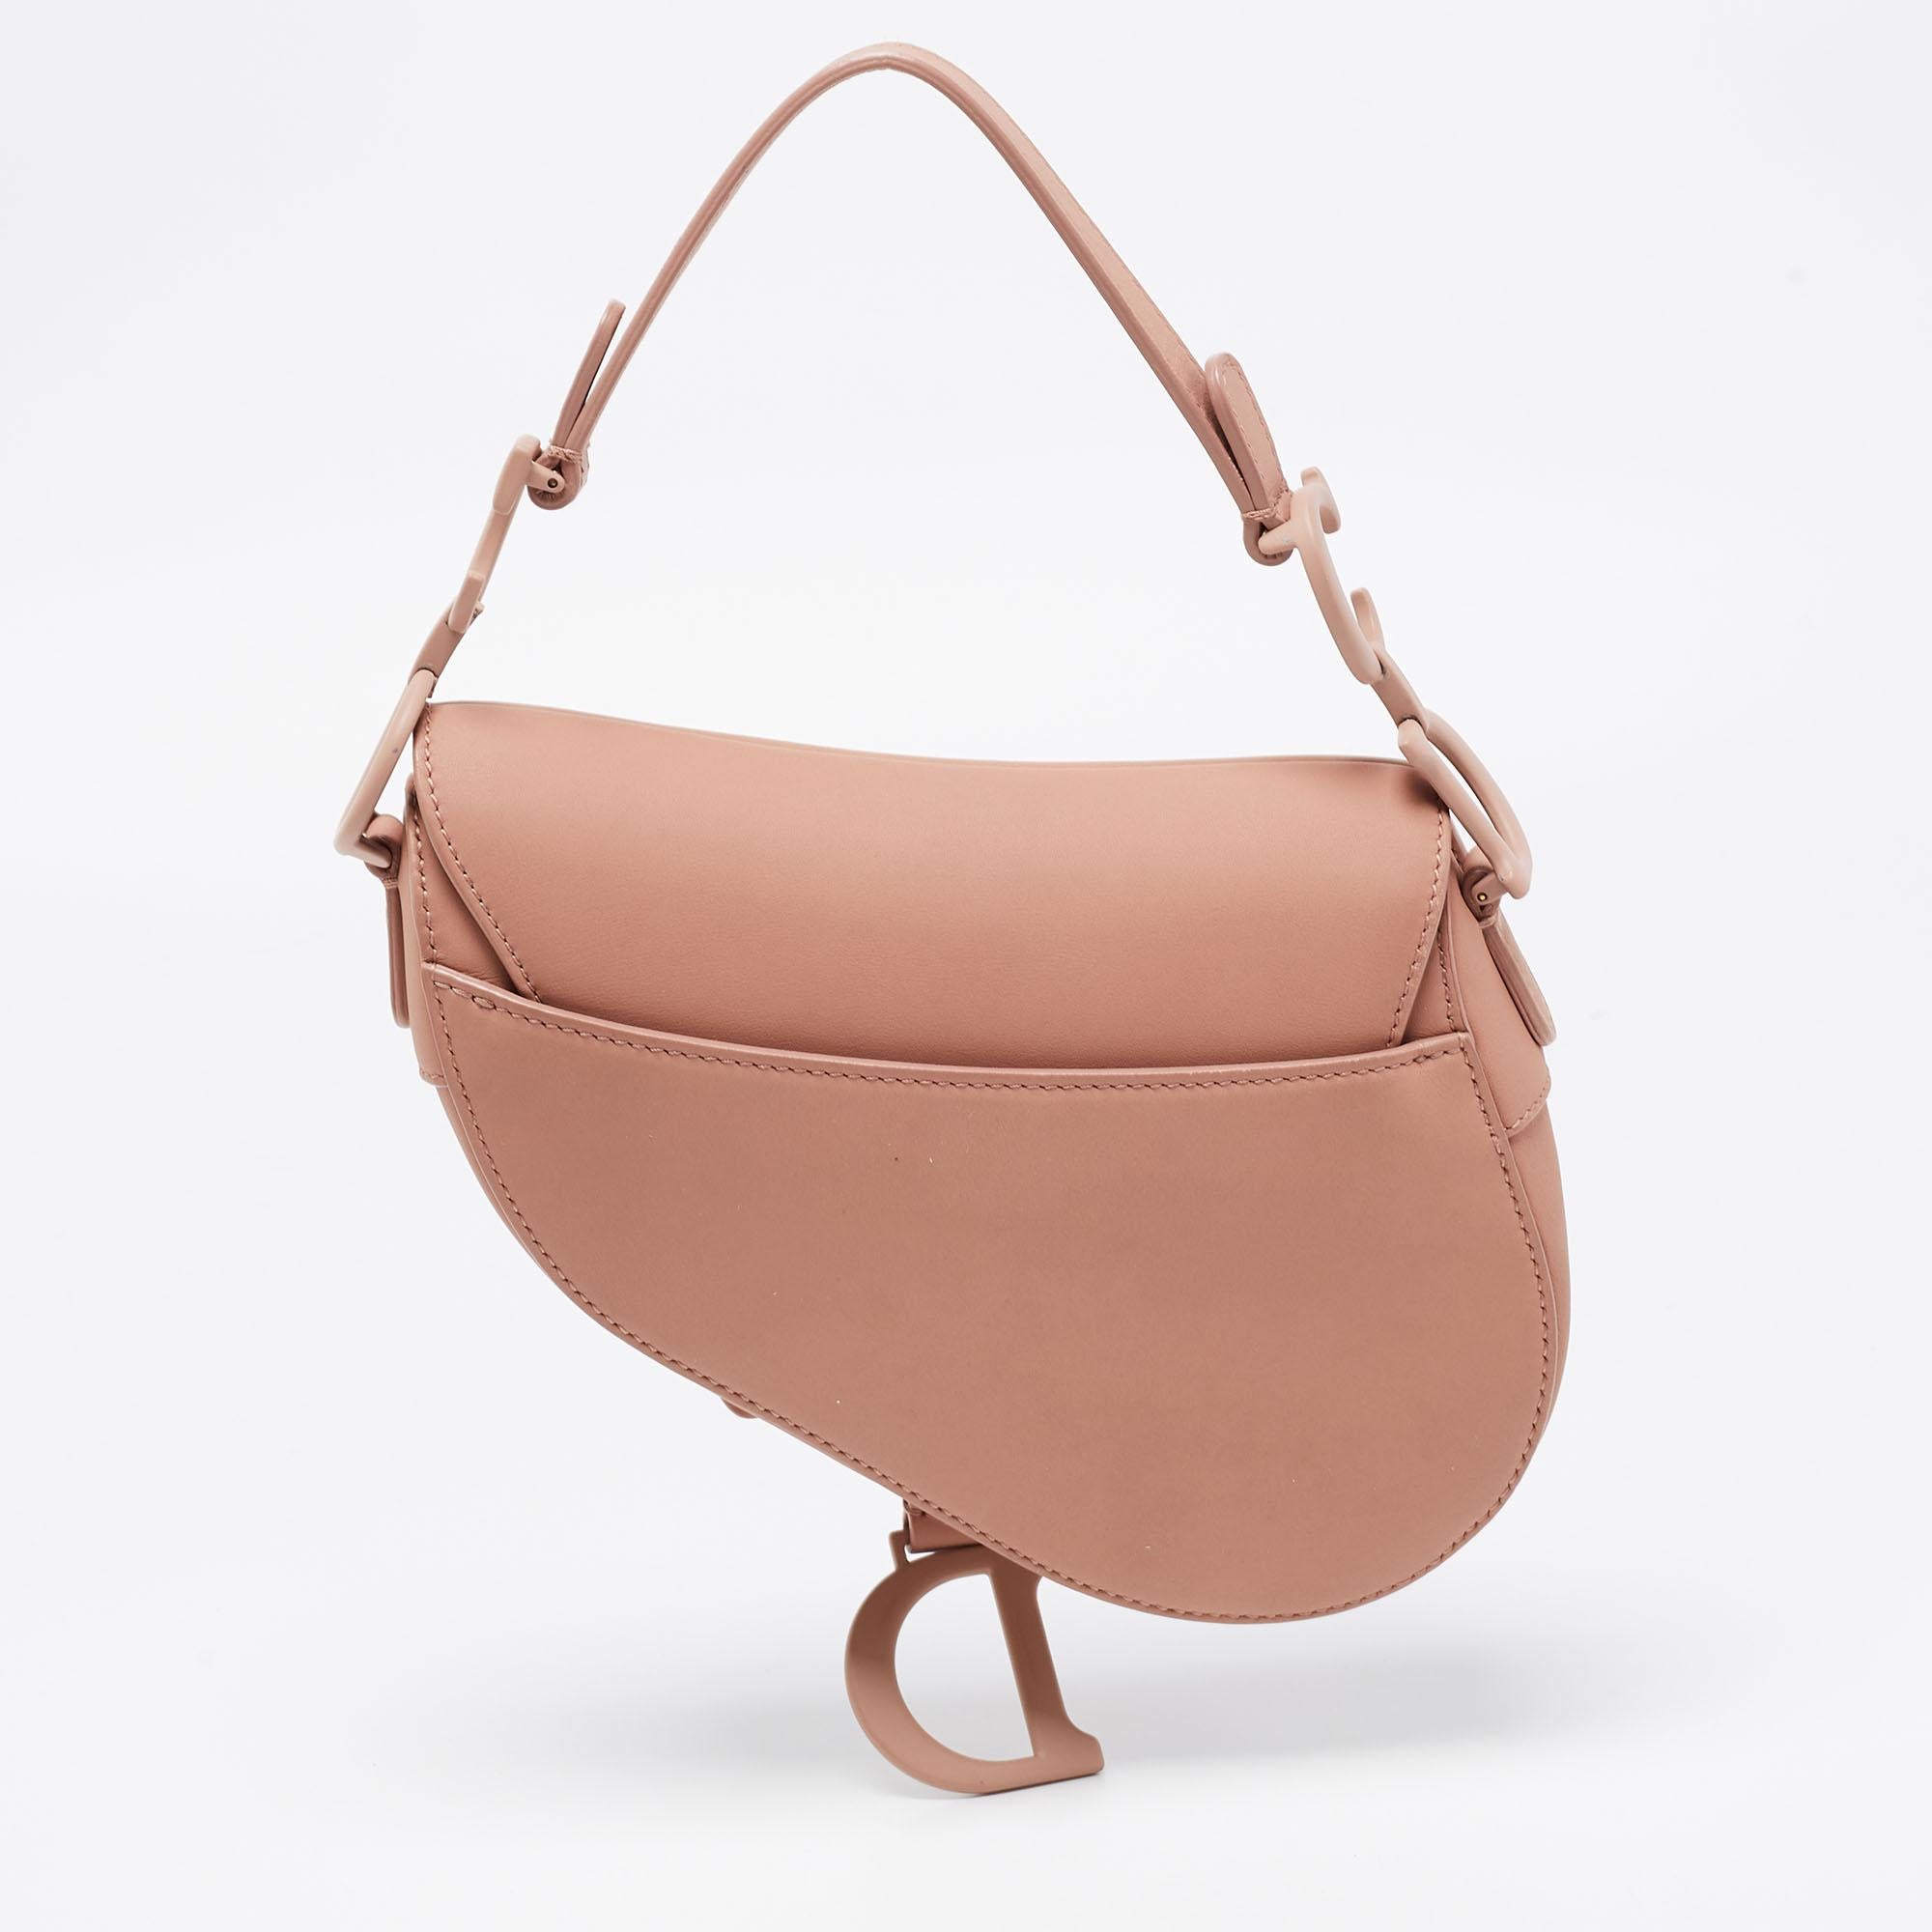 The Dior Saddle made a huge comeback in 2018, and since then, it has been ruling the wishlist of all the fashion elite. A reflection of timeless style and great design, this Dior Saddle bag is sought after for all the right reasons. This bag for